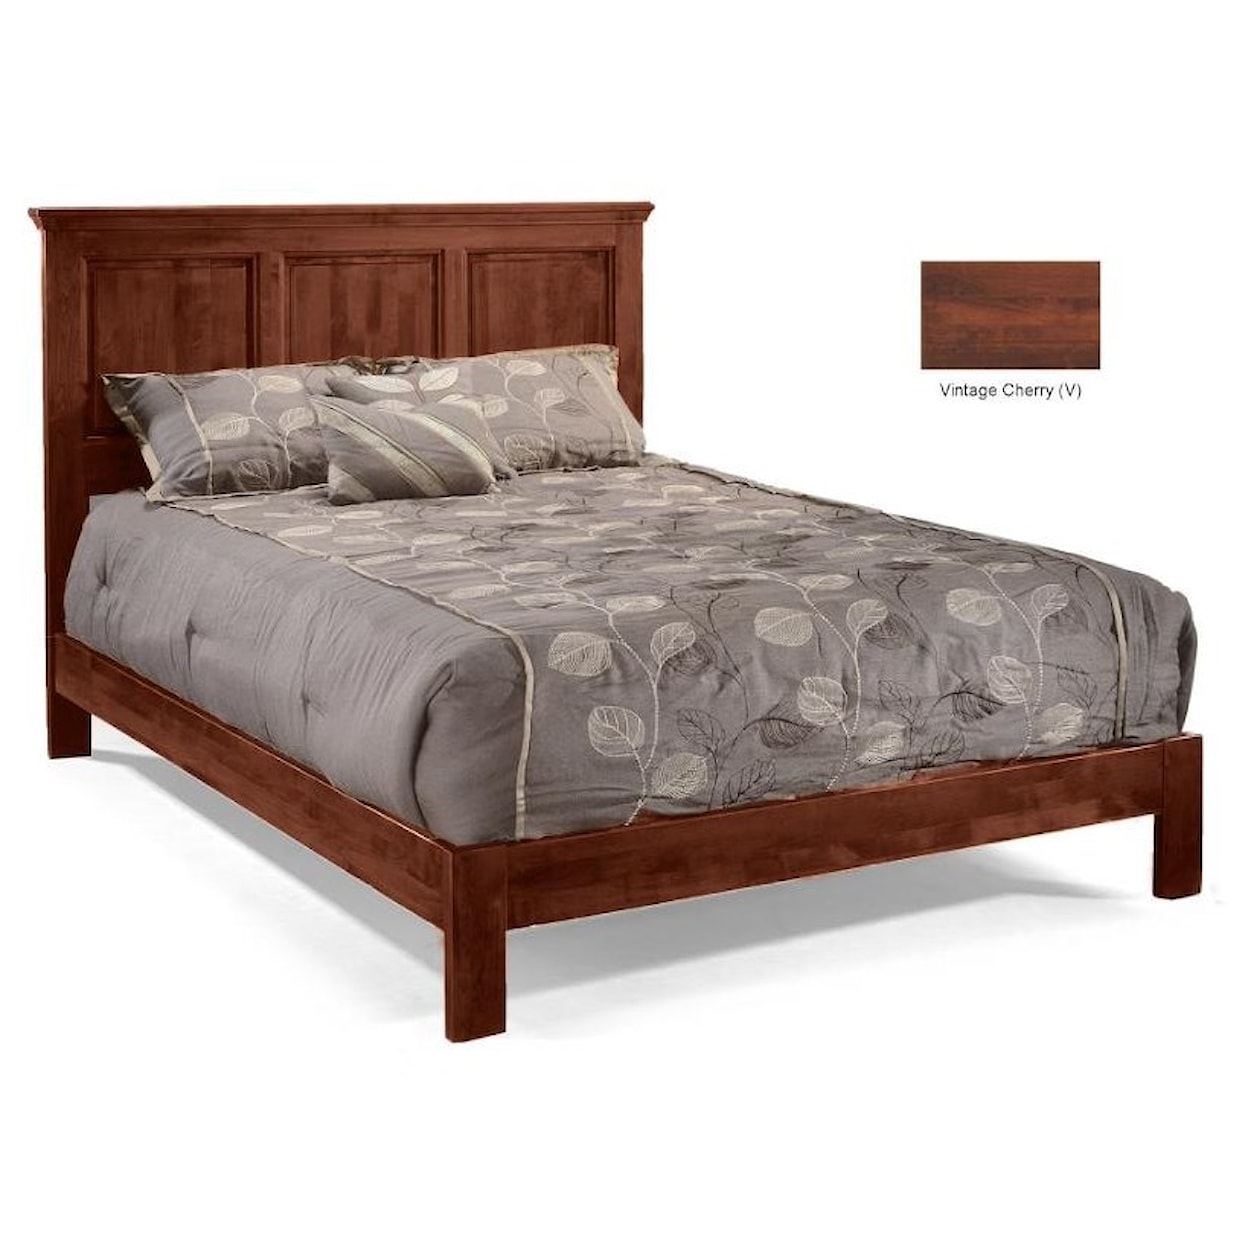 Archbold Furniture Beds Queen Raised Panel Bed